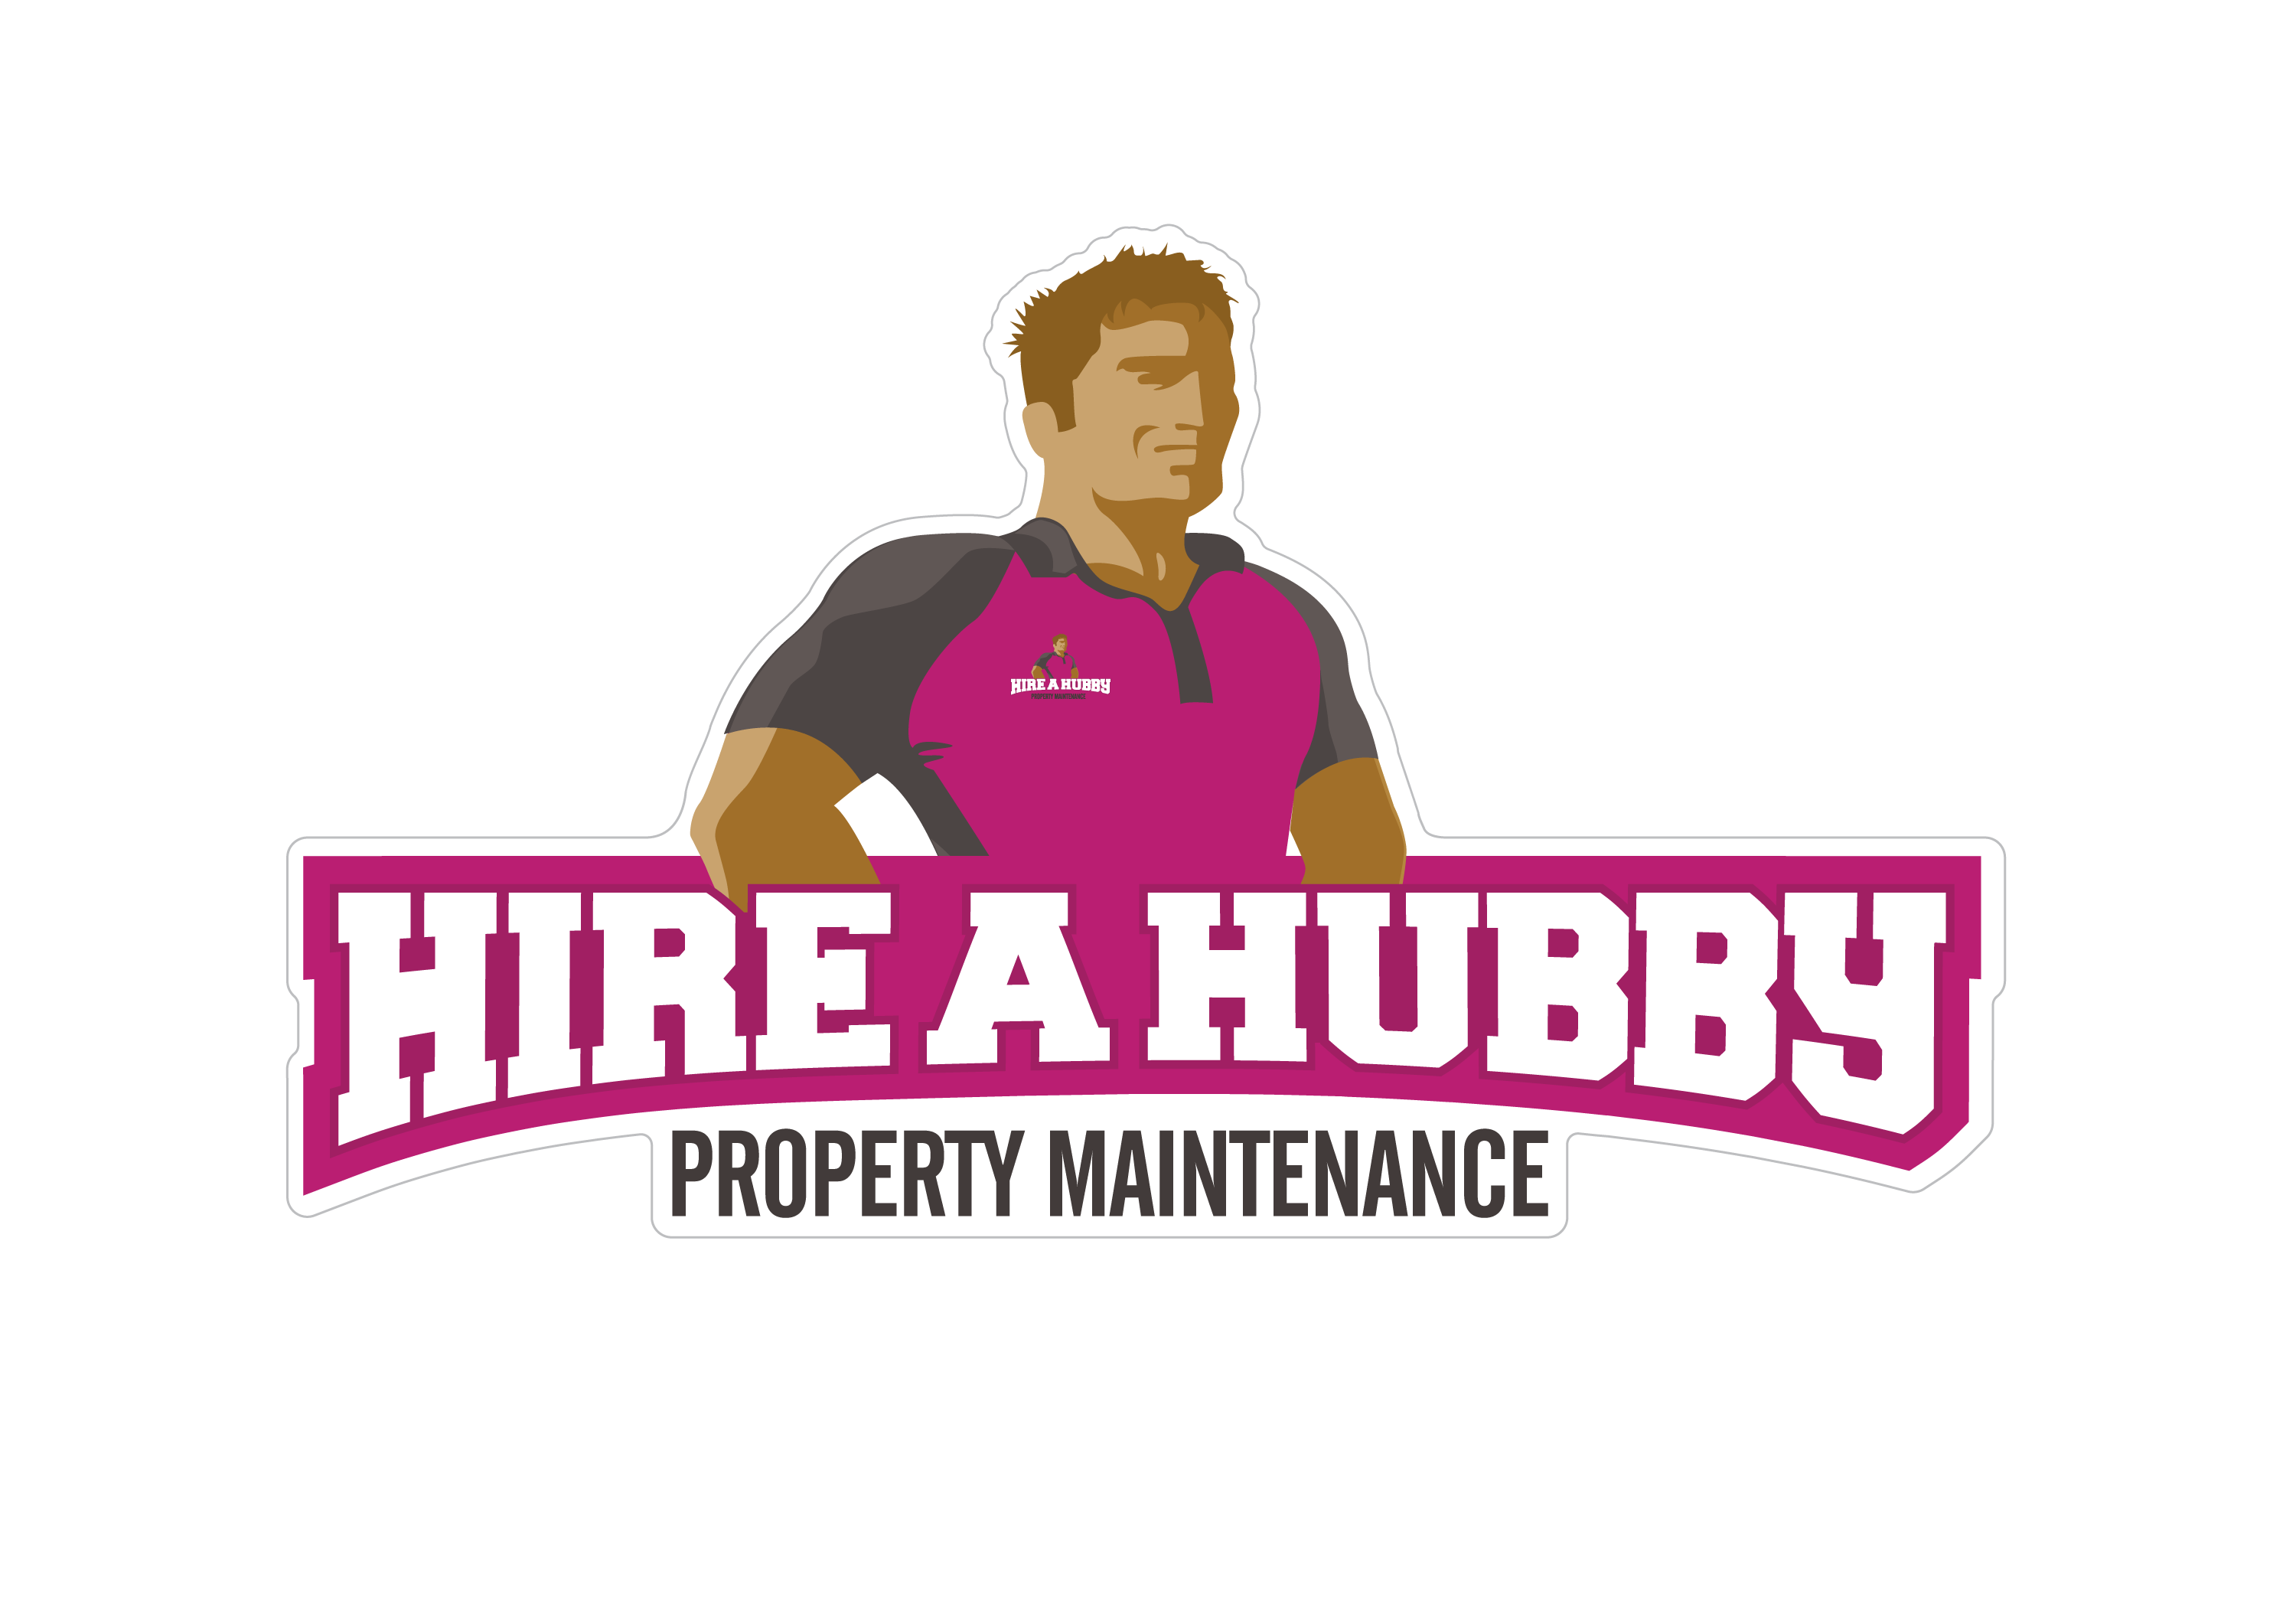 Hire-a-hubby